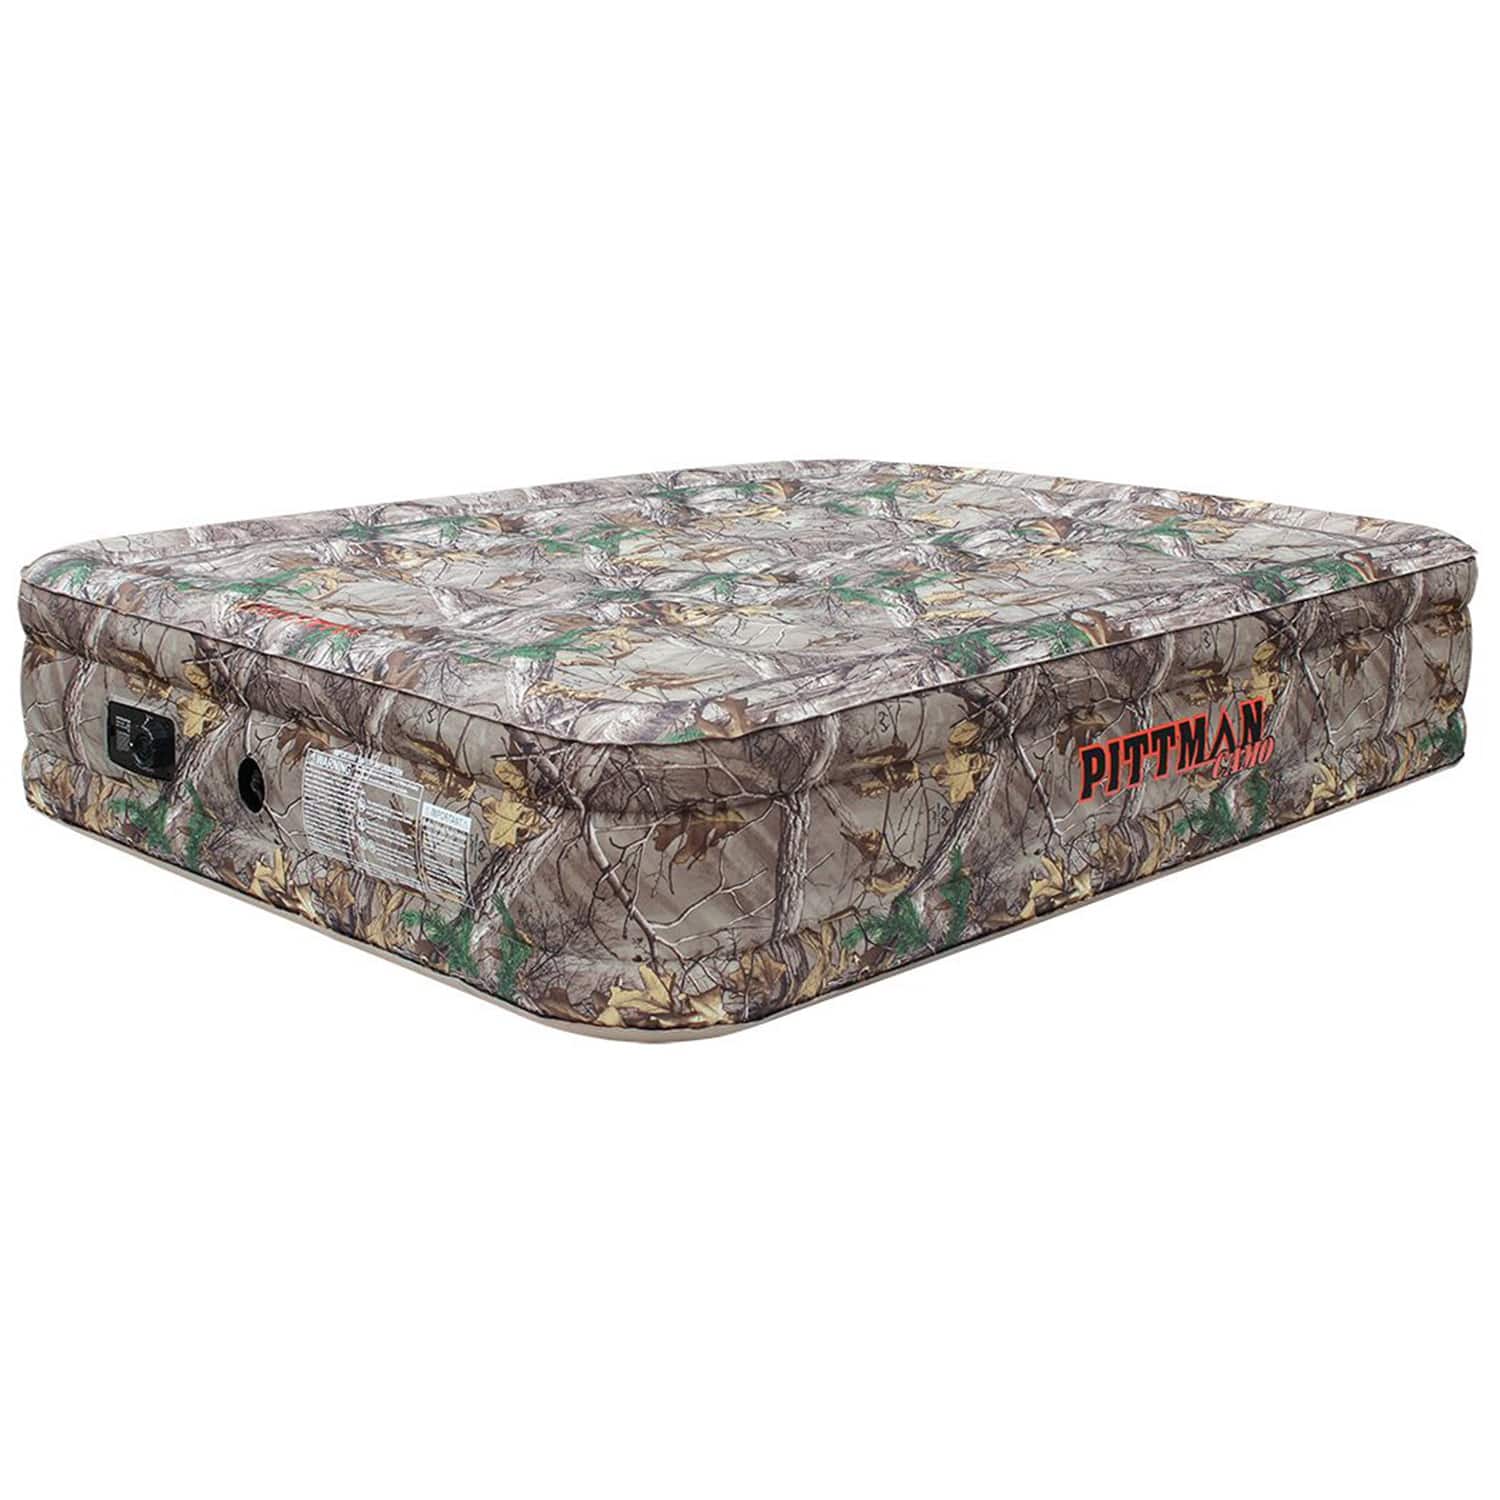 Pittman Outdoors PPI-CMO_CAMPX16 Queen Realtree XTRA Camouflage Fabric Ultimate 16 Air Mattress